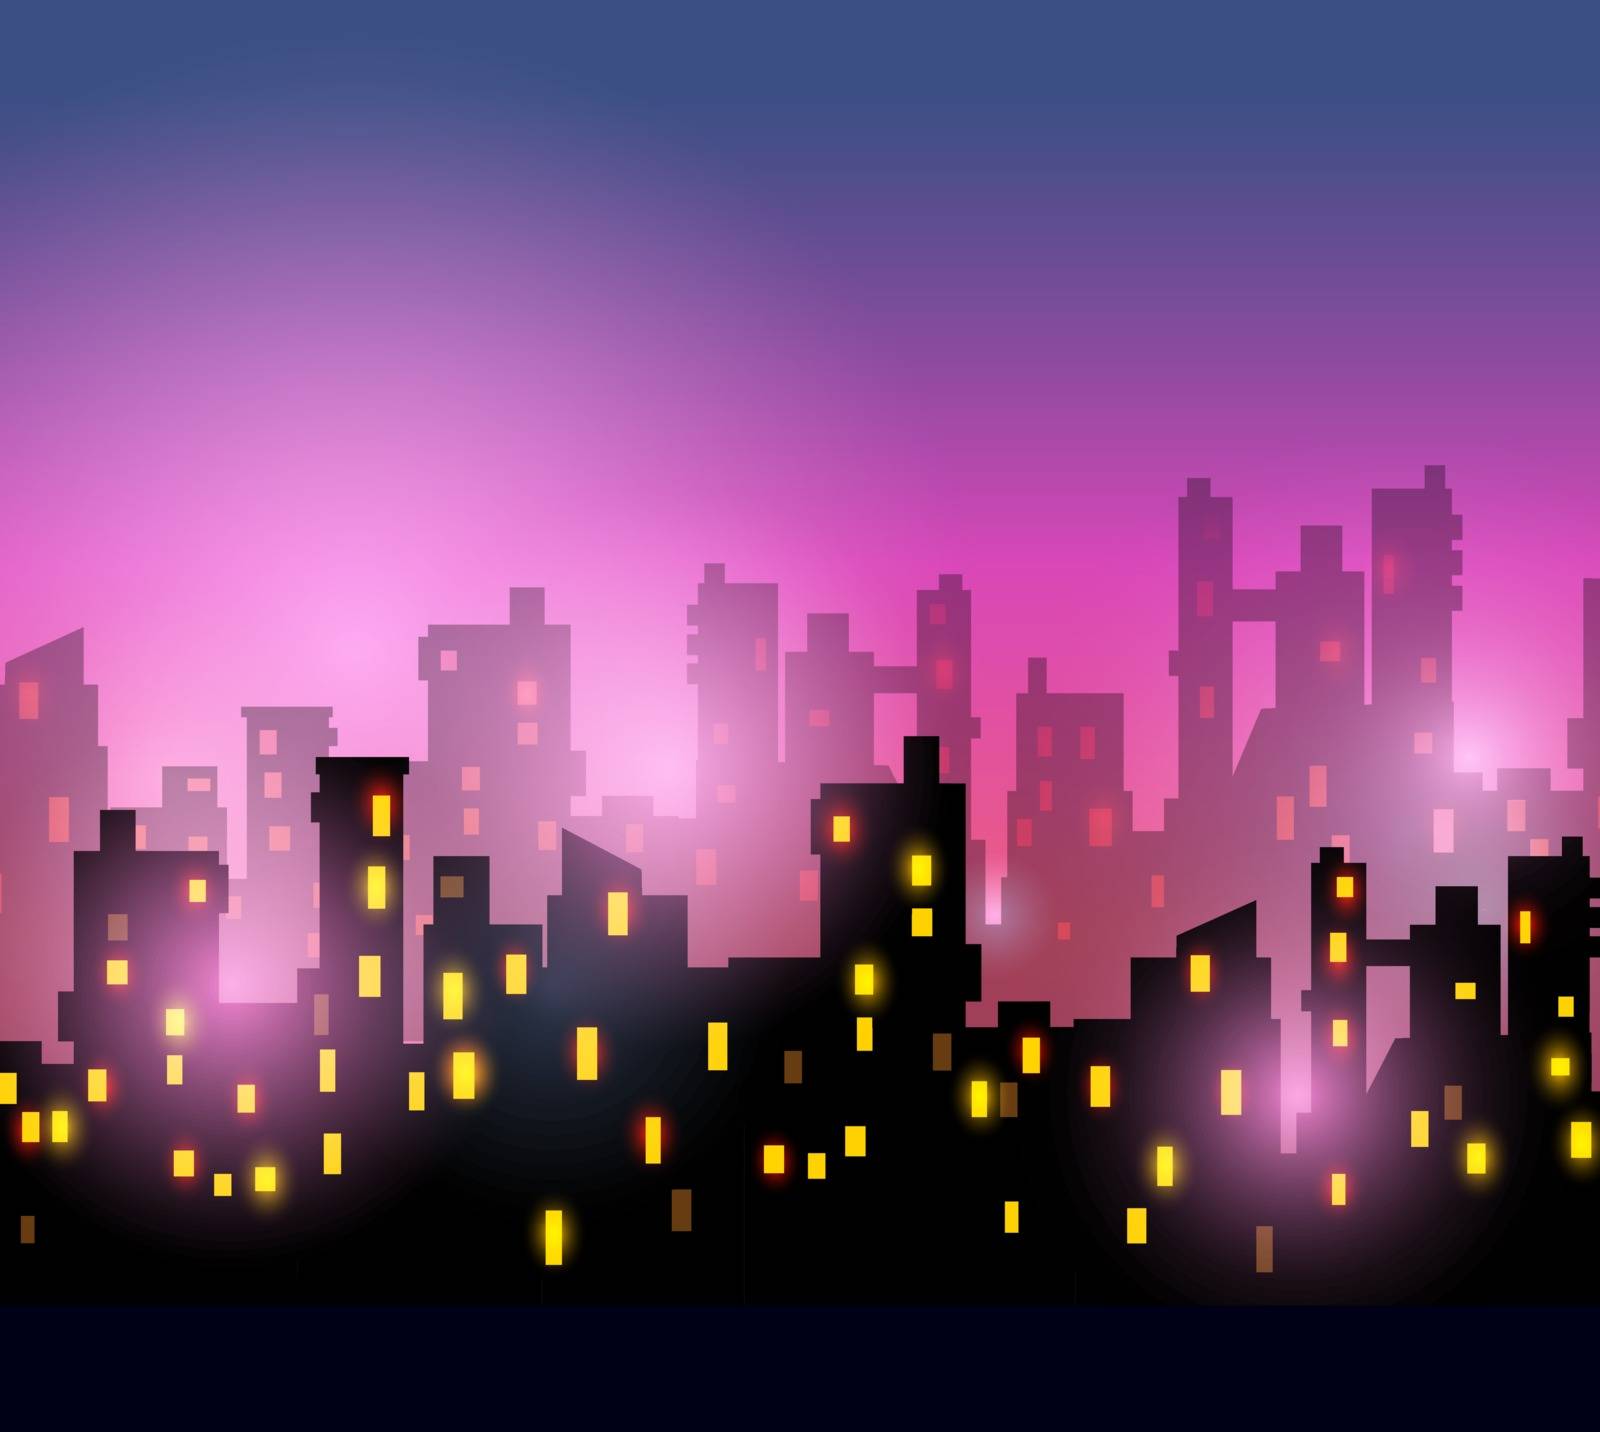 City silhouettes of different colors on red